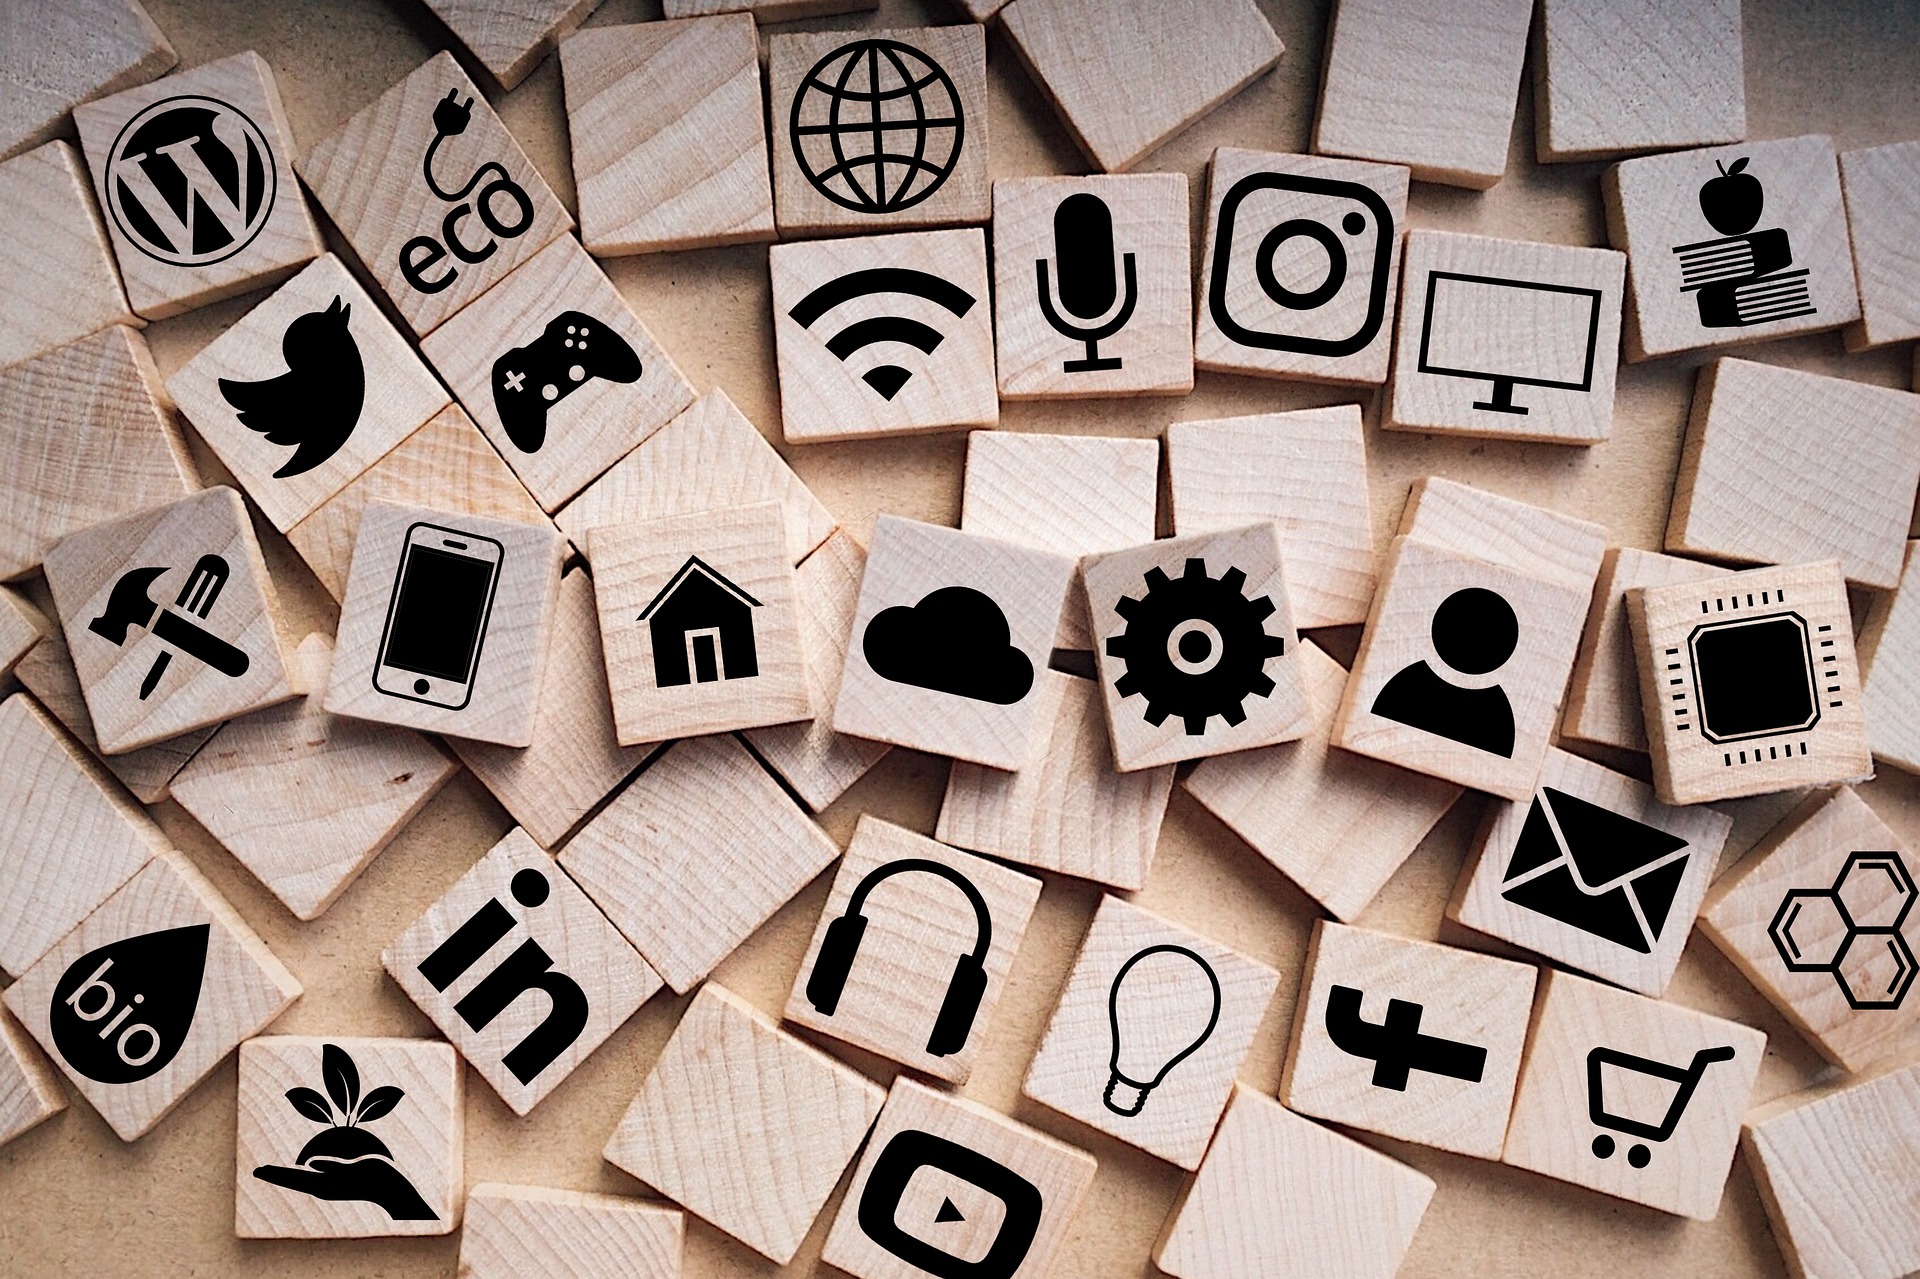 Looking down on a jumbled assortment of small, wooden tiles, each stamped with a different icon symbolizing business, social media, or communications.